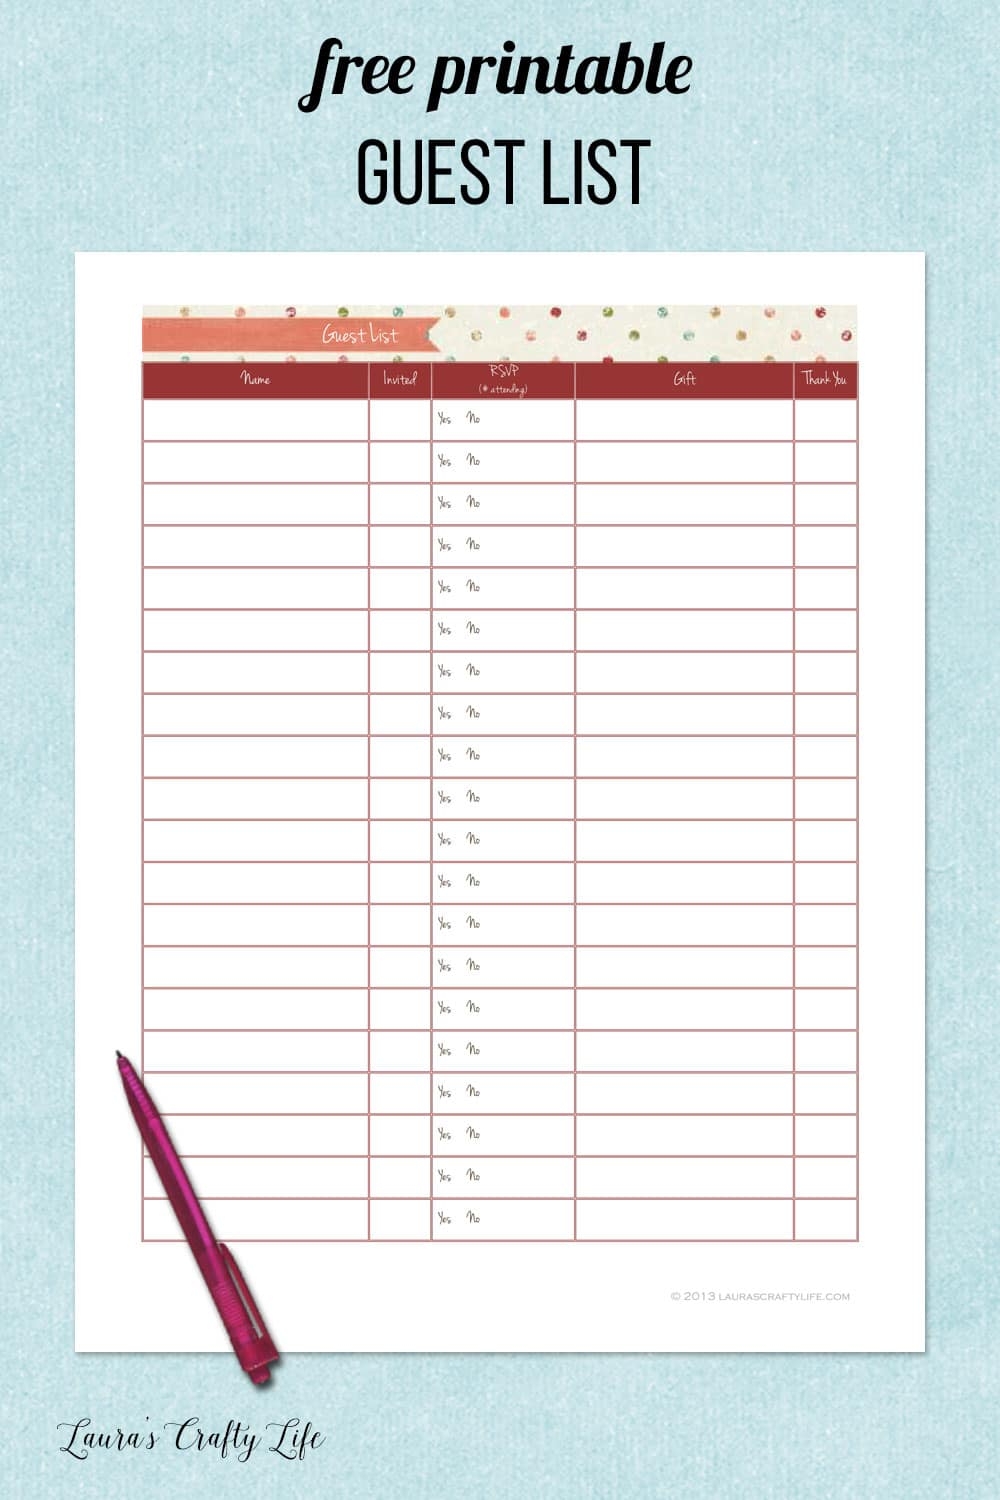 Day 21 Printable Guest List - Free Printable Birthday Guest List